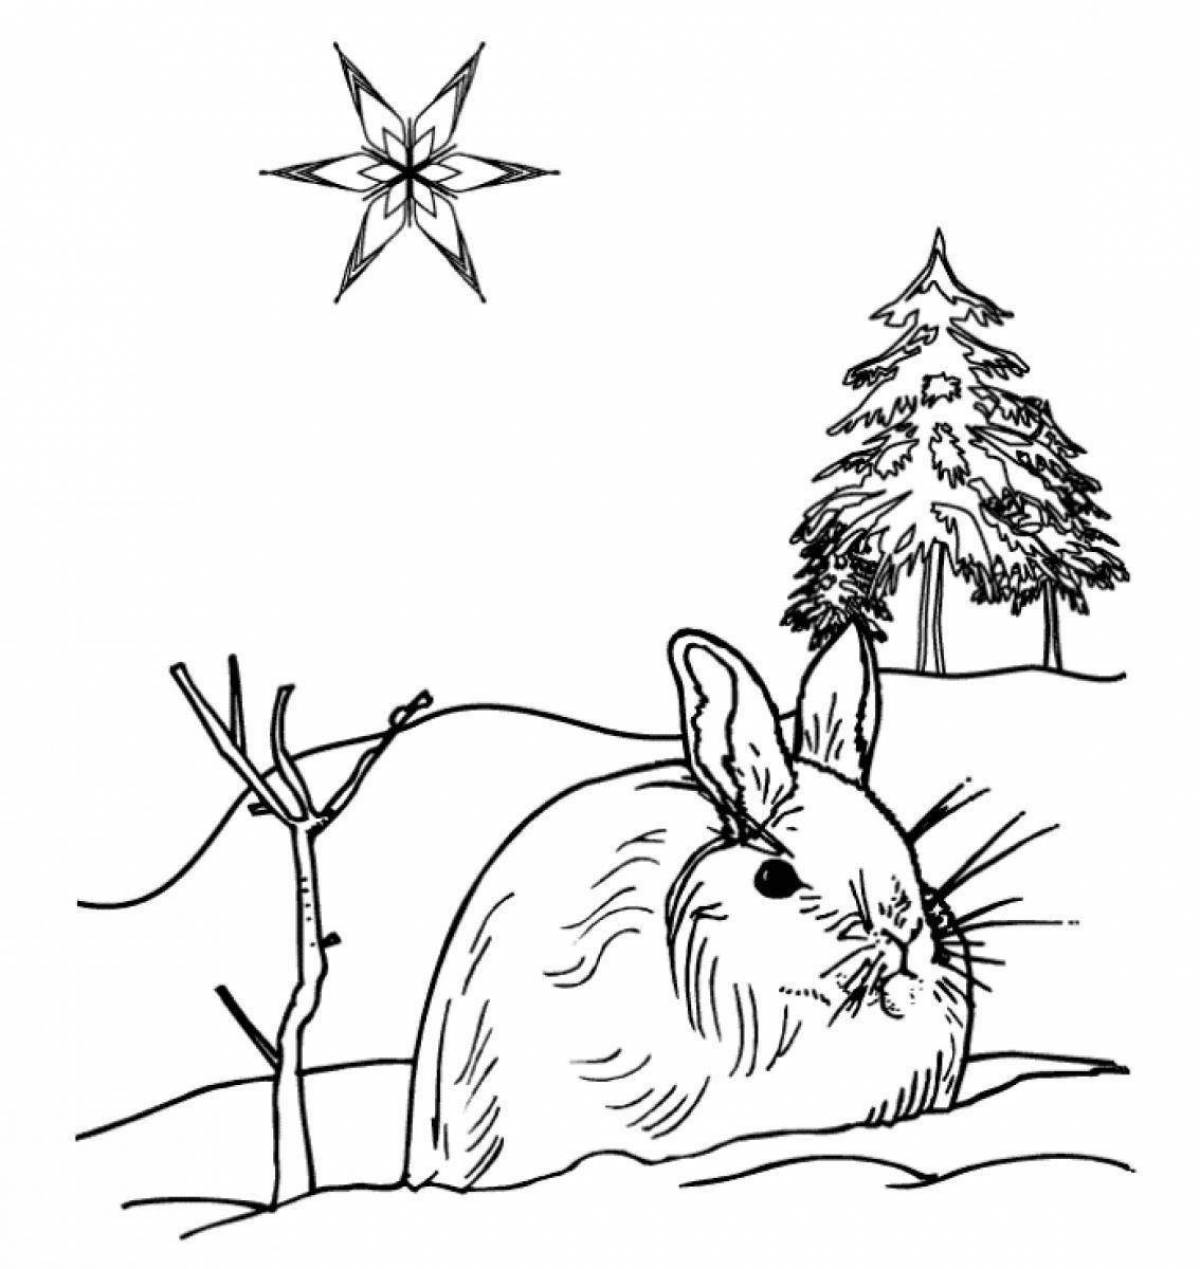 Glowing bunny winter coloring book